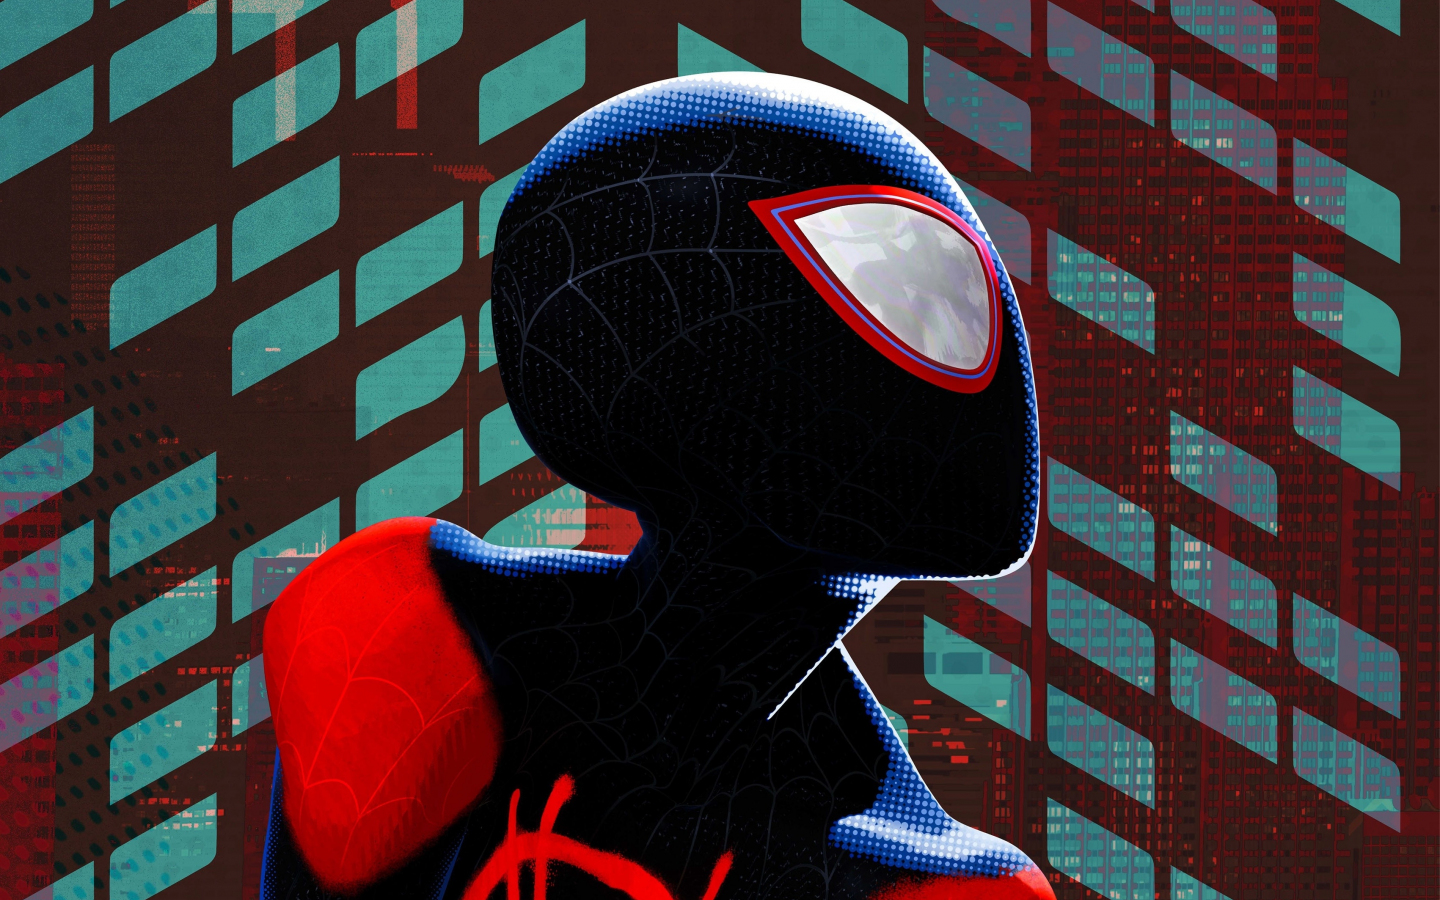 Download wallpaper 1440x900 miles morales, black suit, spider-man: into the  spider-verse, 1440x900 widescreen 16:10 hd background, 15269